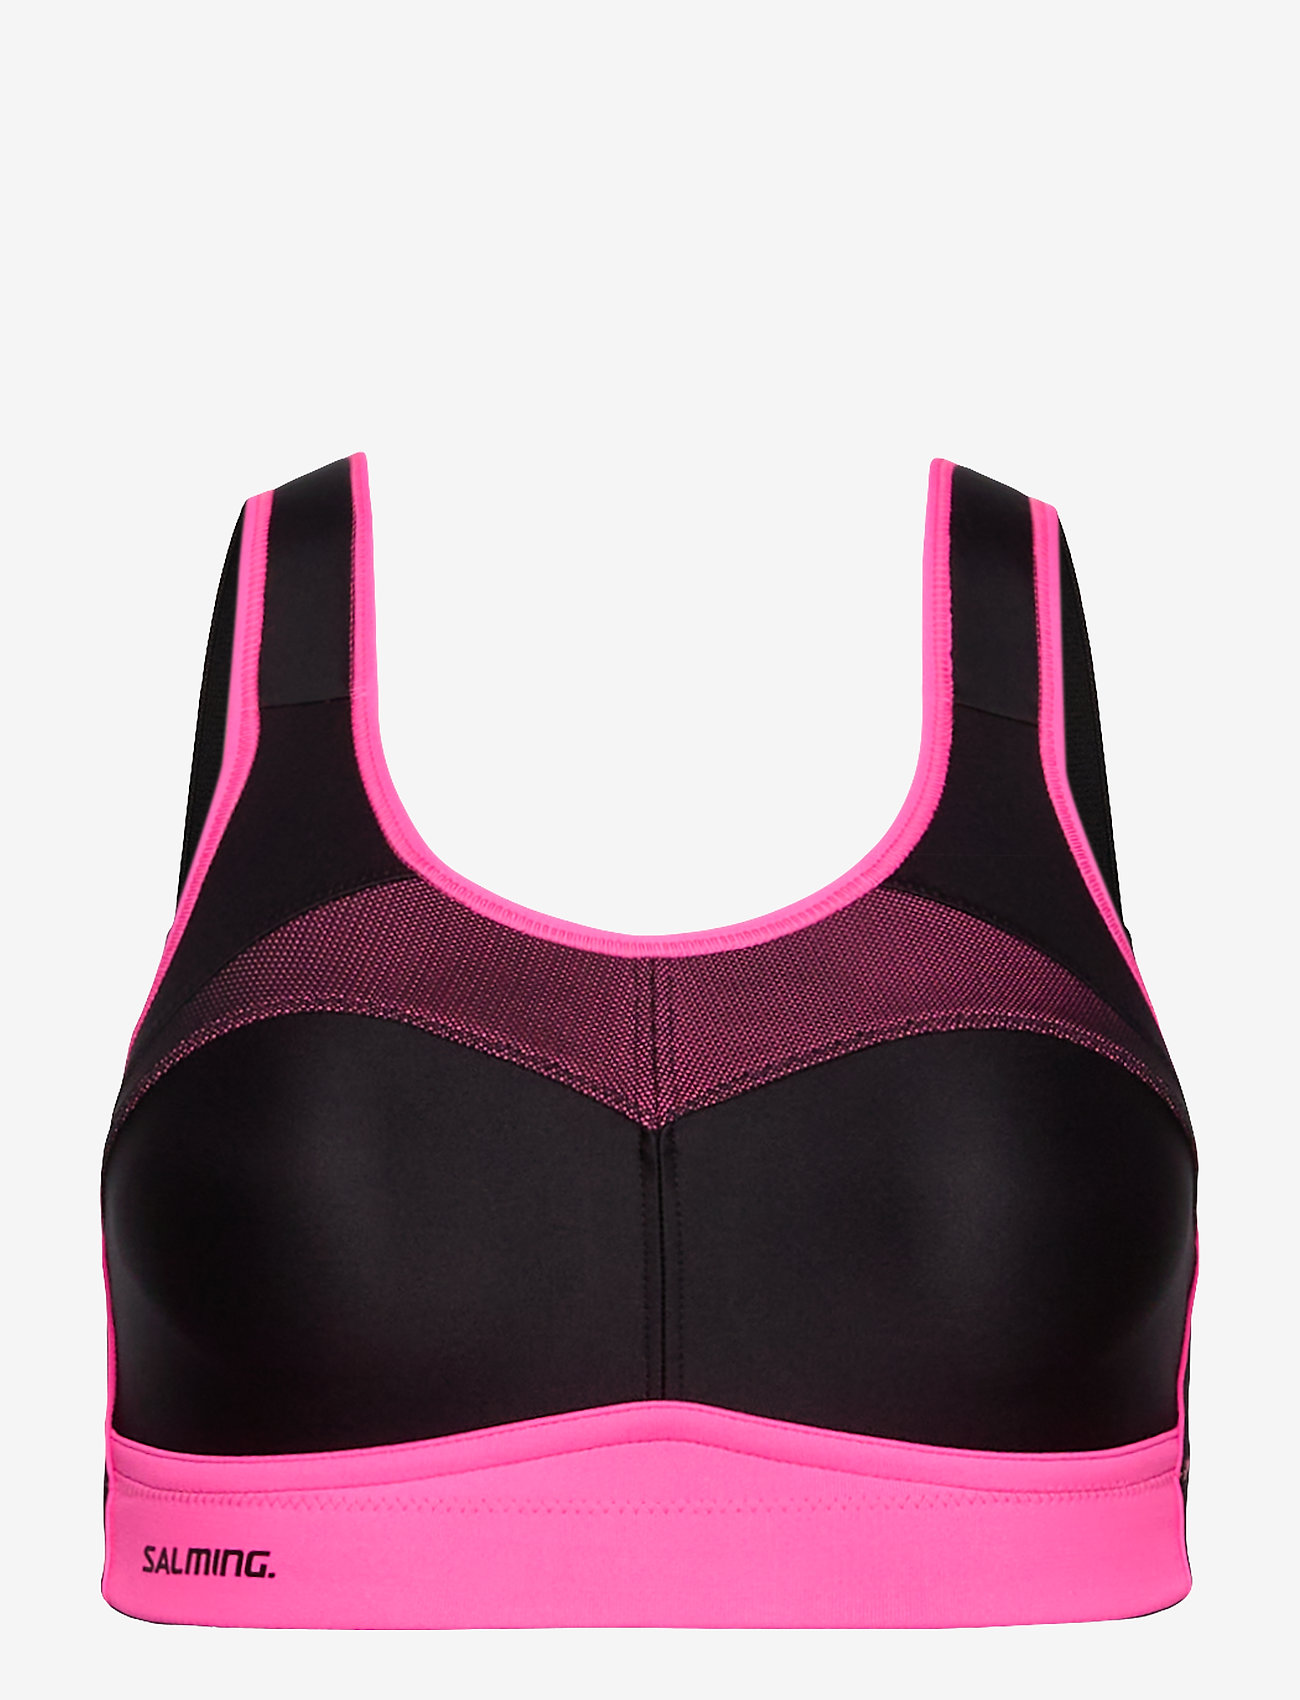 Salming - Capacity, Sports top - sport bras: high support - pink - 0